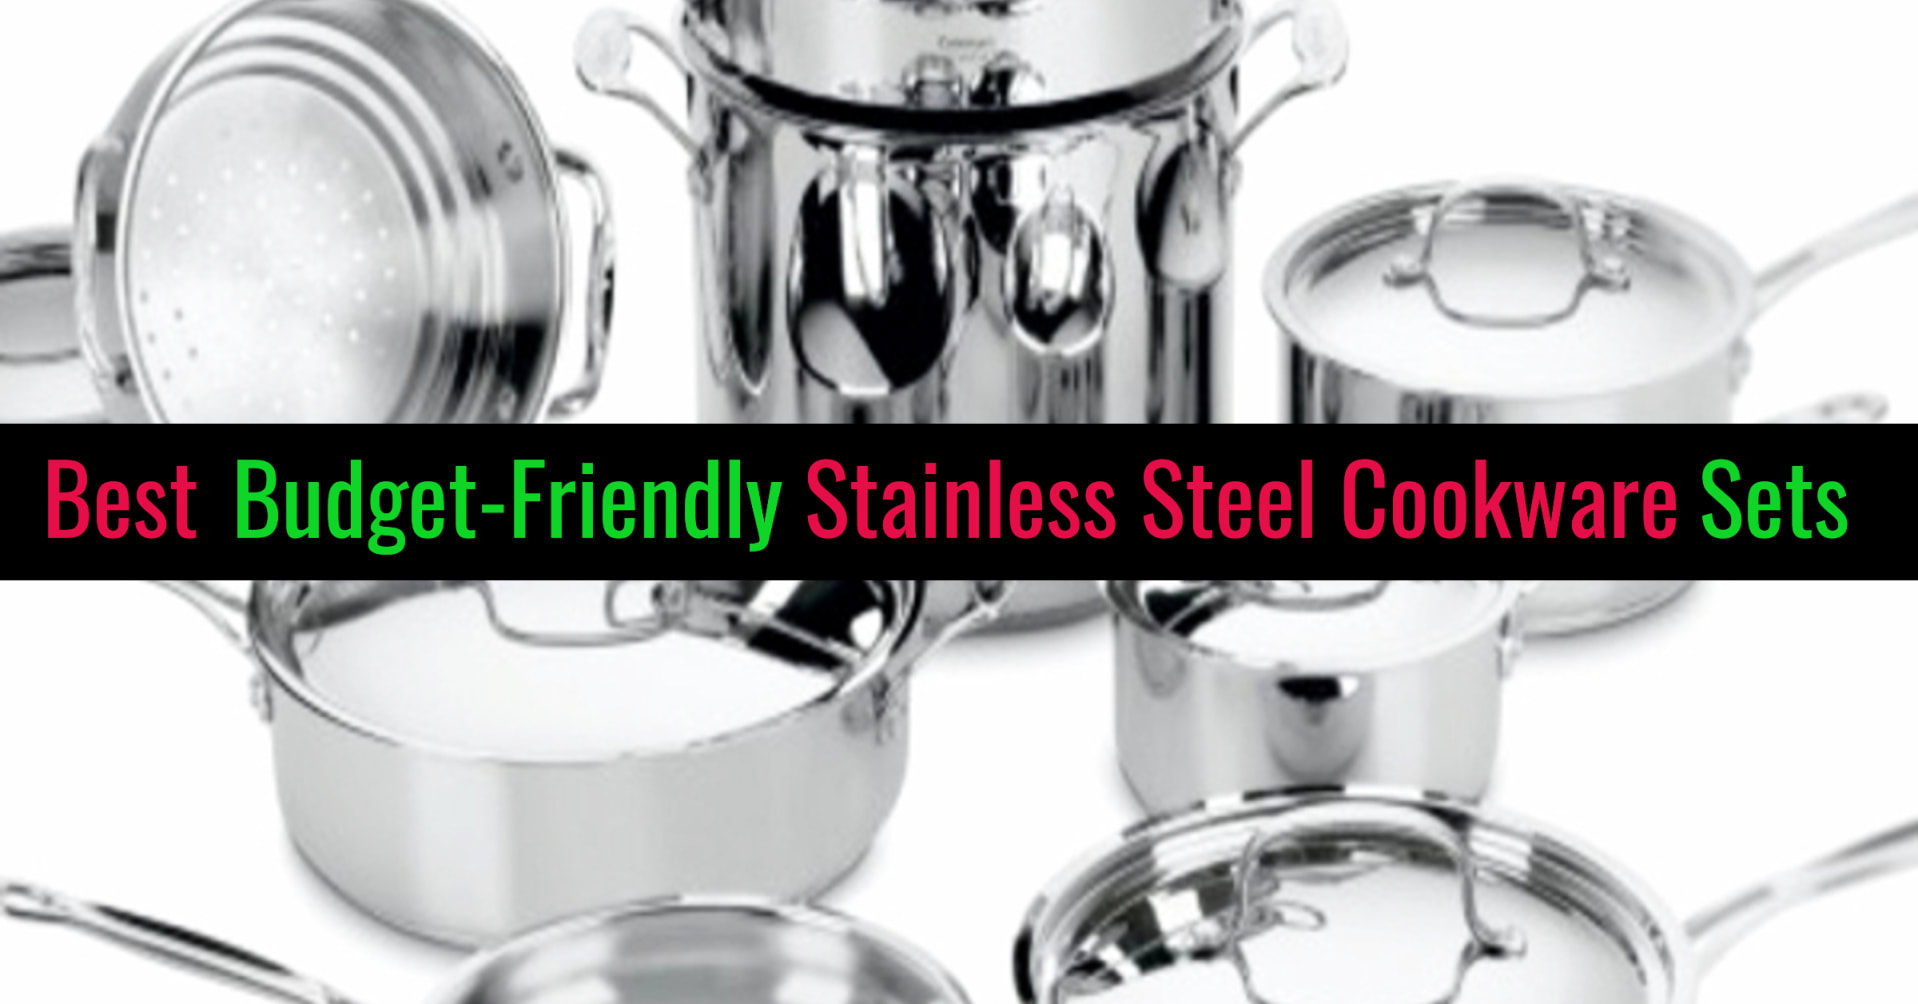 Best stainless steel cookware sets on a budget - stainless steel cookware pros and cons - best stainless steel cookware for the money